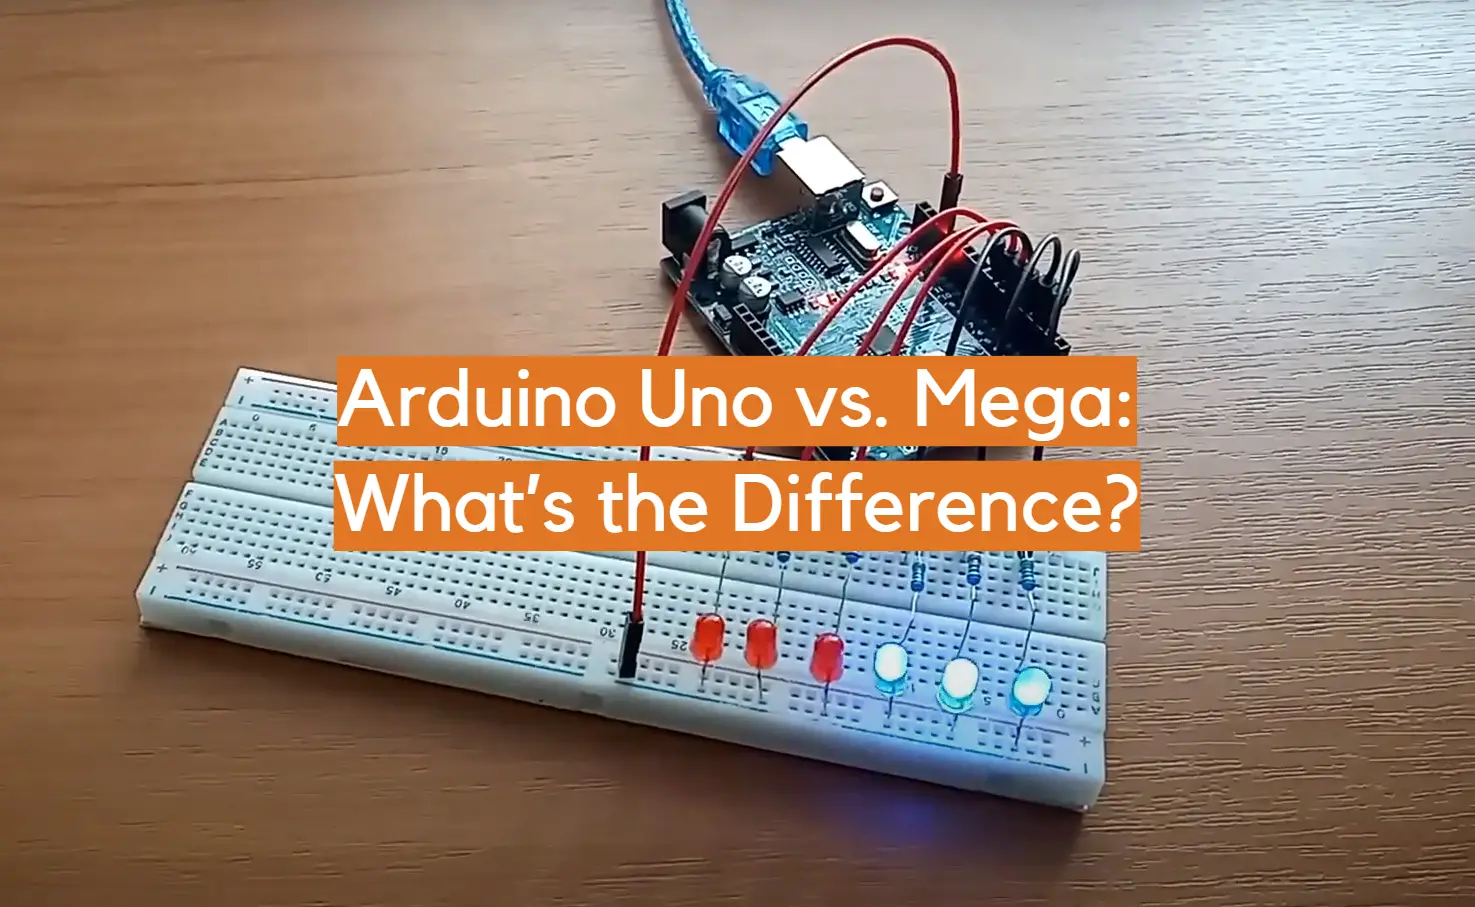 Arduino Uno vs. Mega: What’s the Difference?